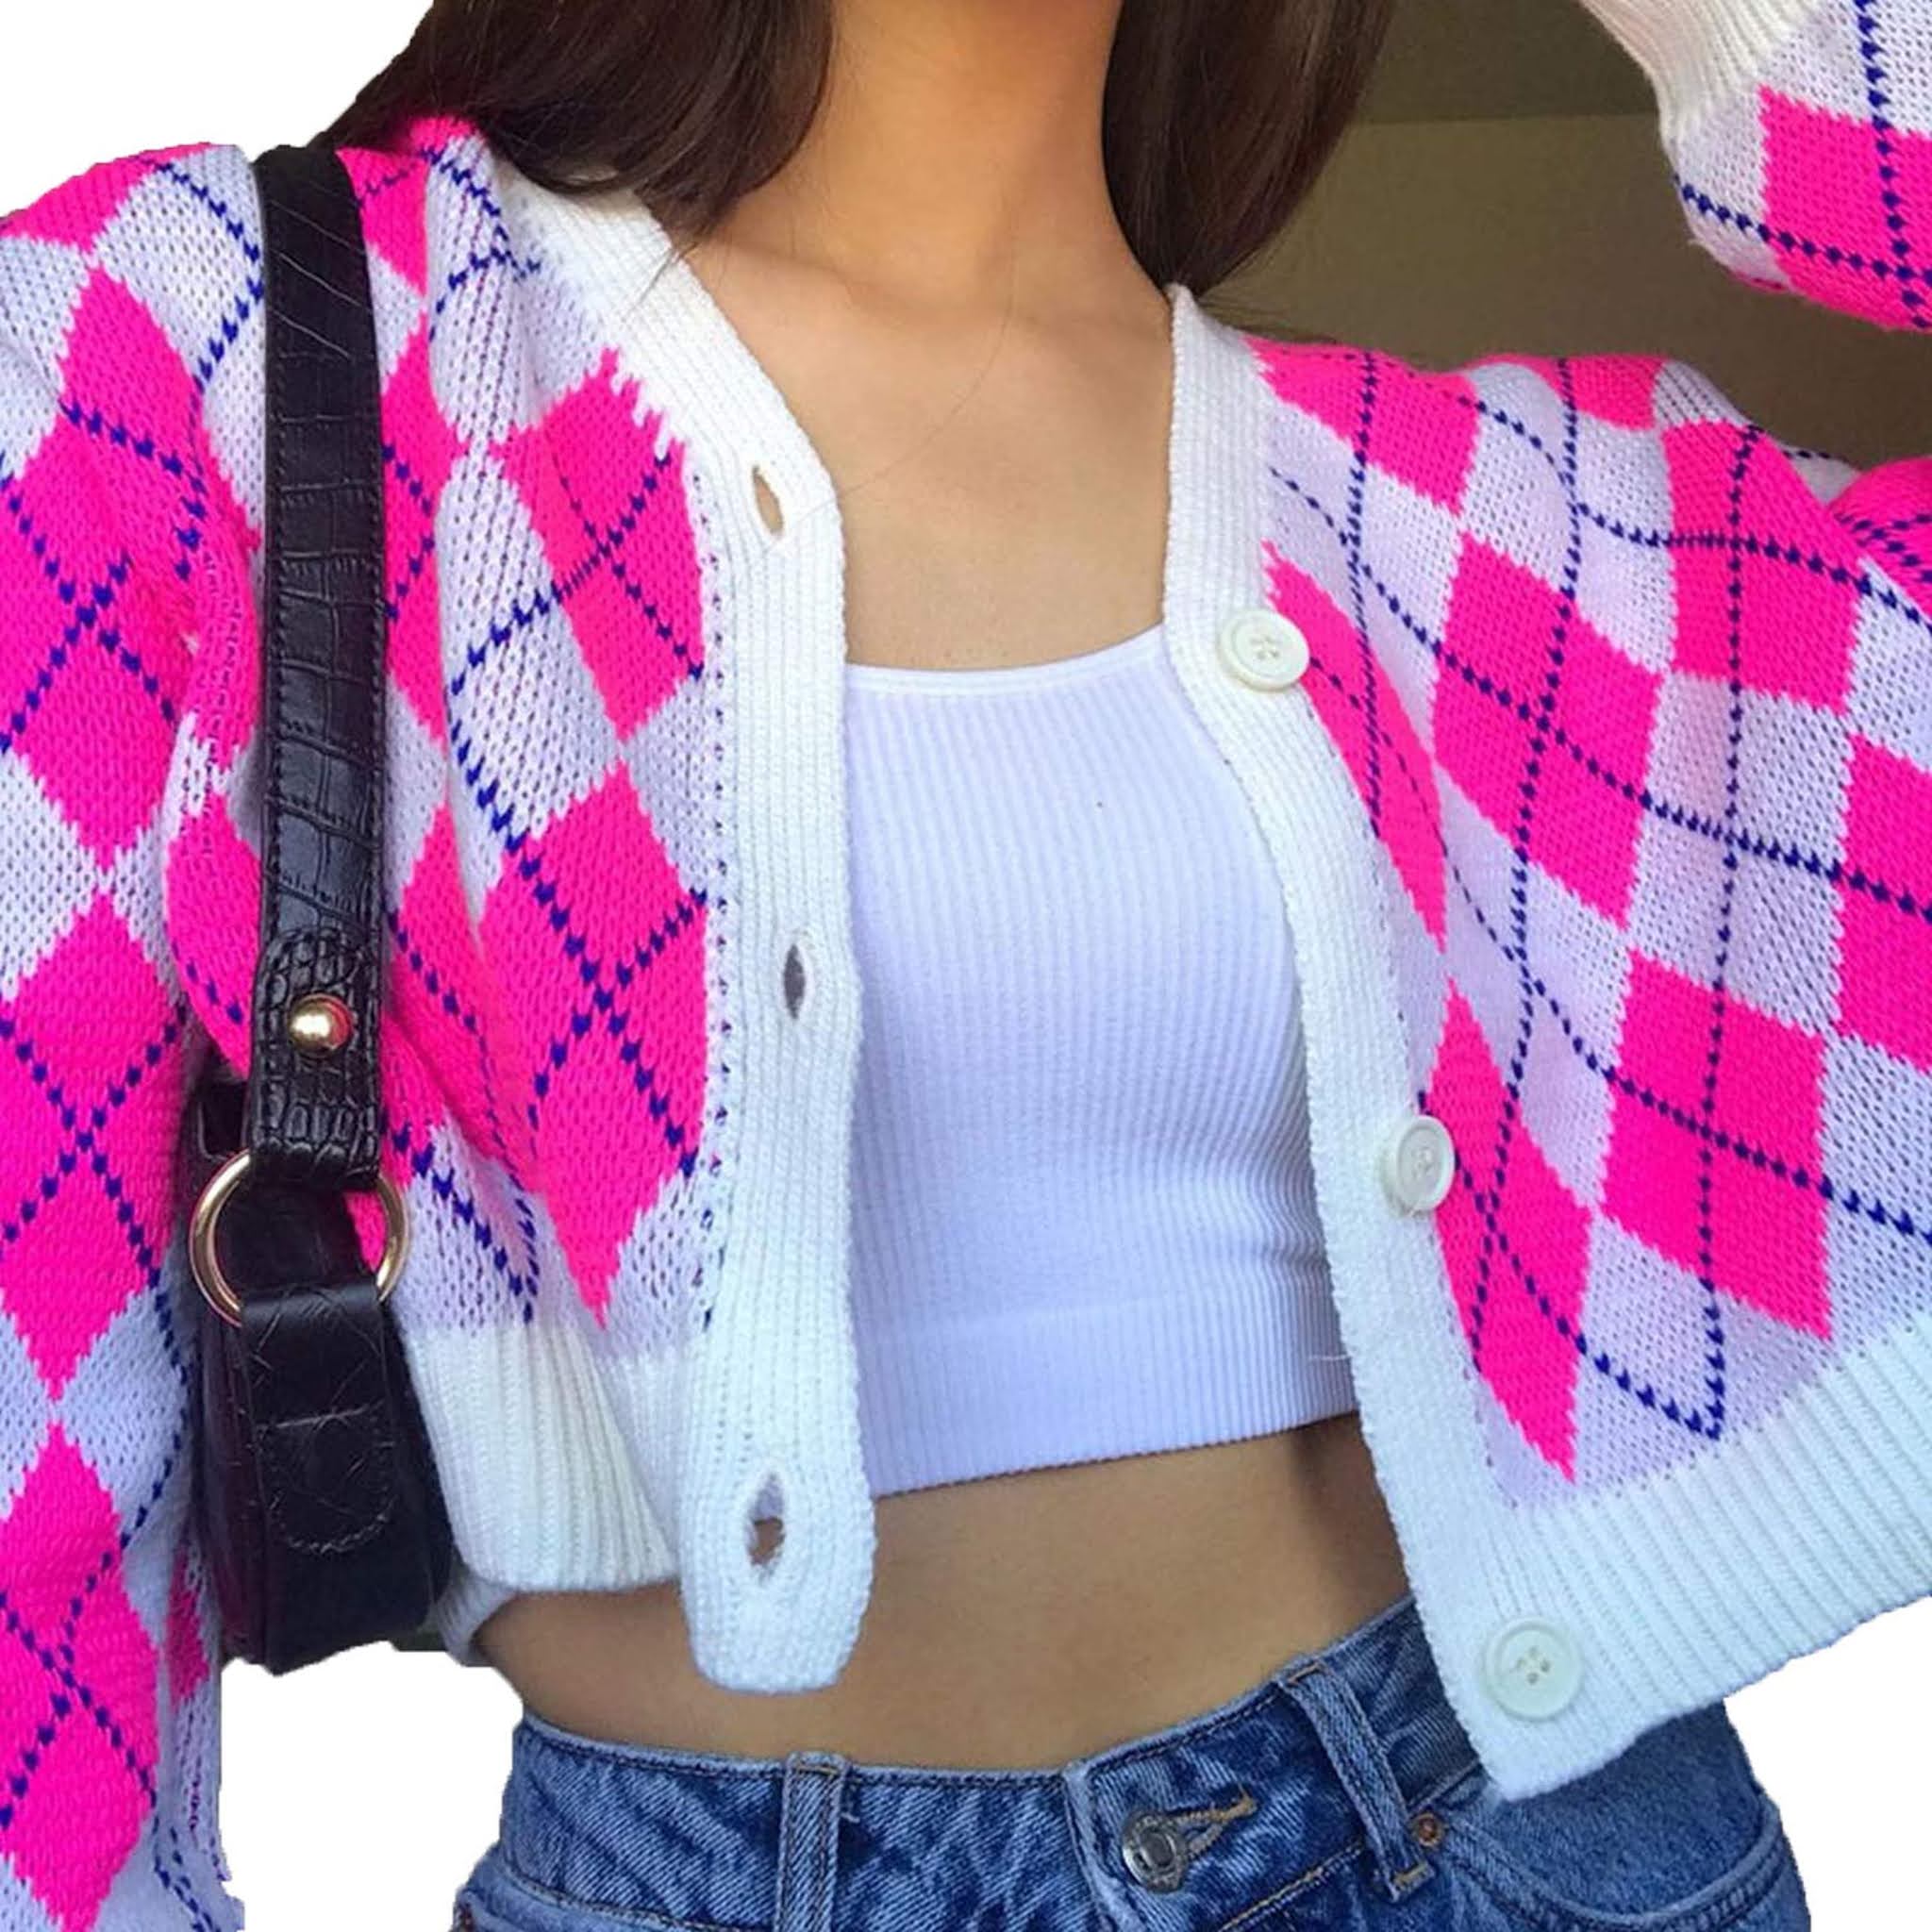 Plaid Knitted Cropped Cardigan Sweater Women Sweet Clothes V Neck Long Sleeve Y2K Autumn Knitwear